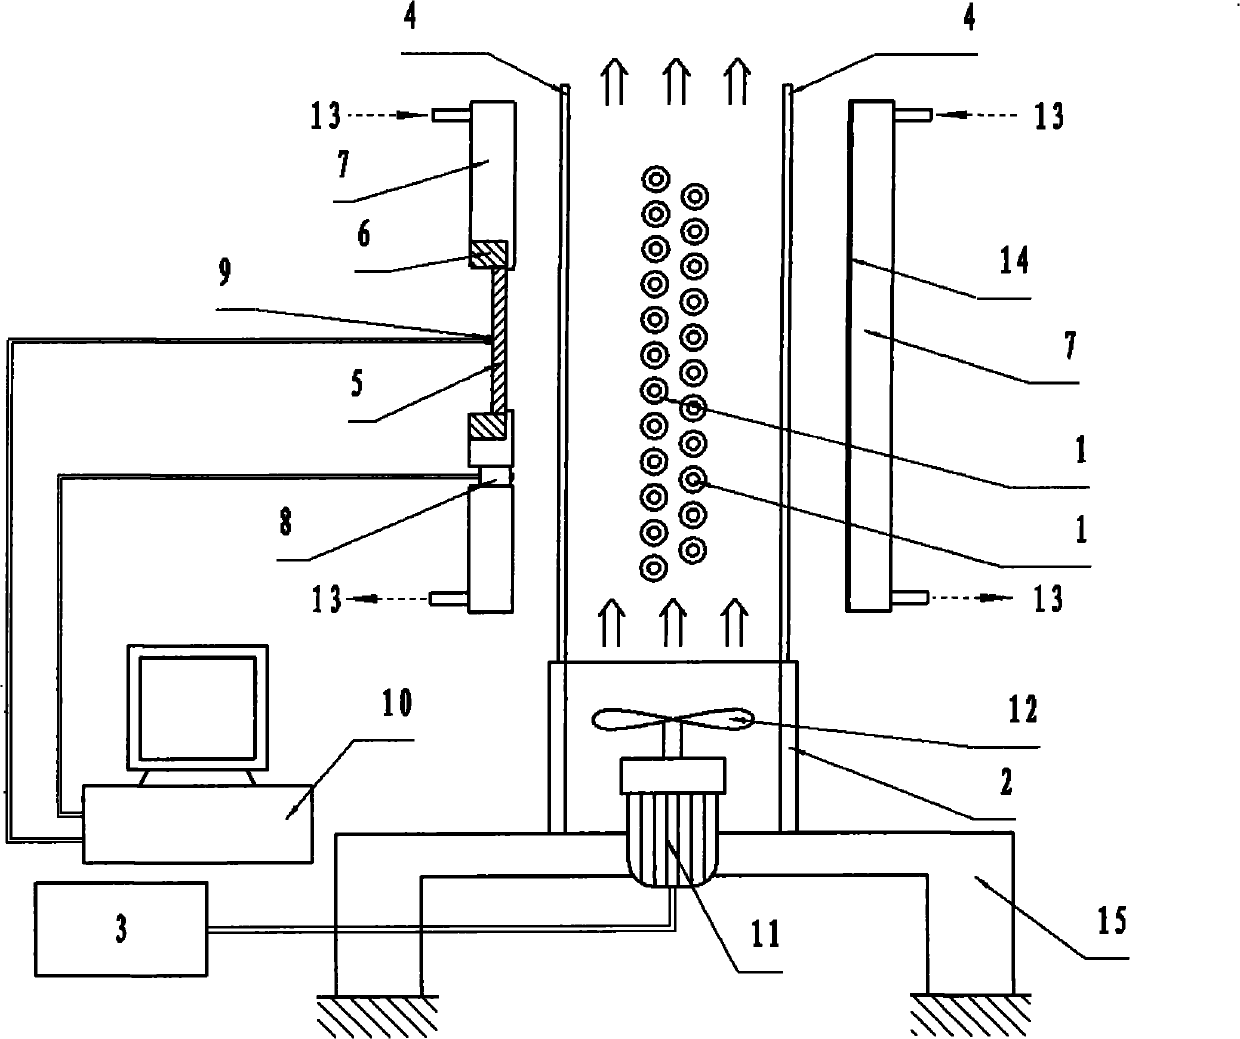 Infrared radiation heat flow density reinforcement device for high temperature pneumatic thermal simulating test of missile